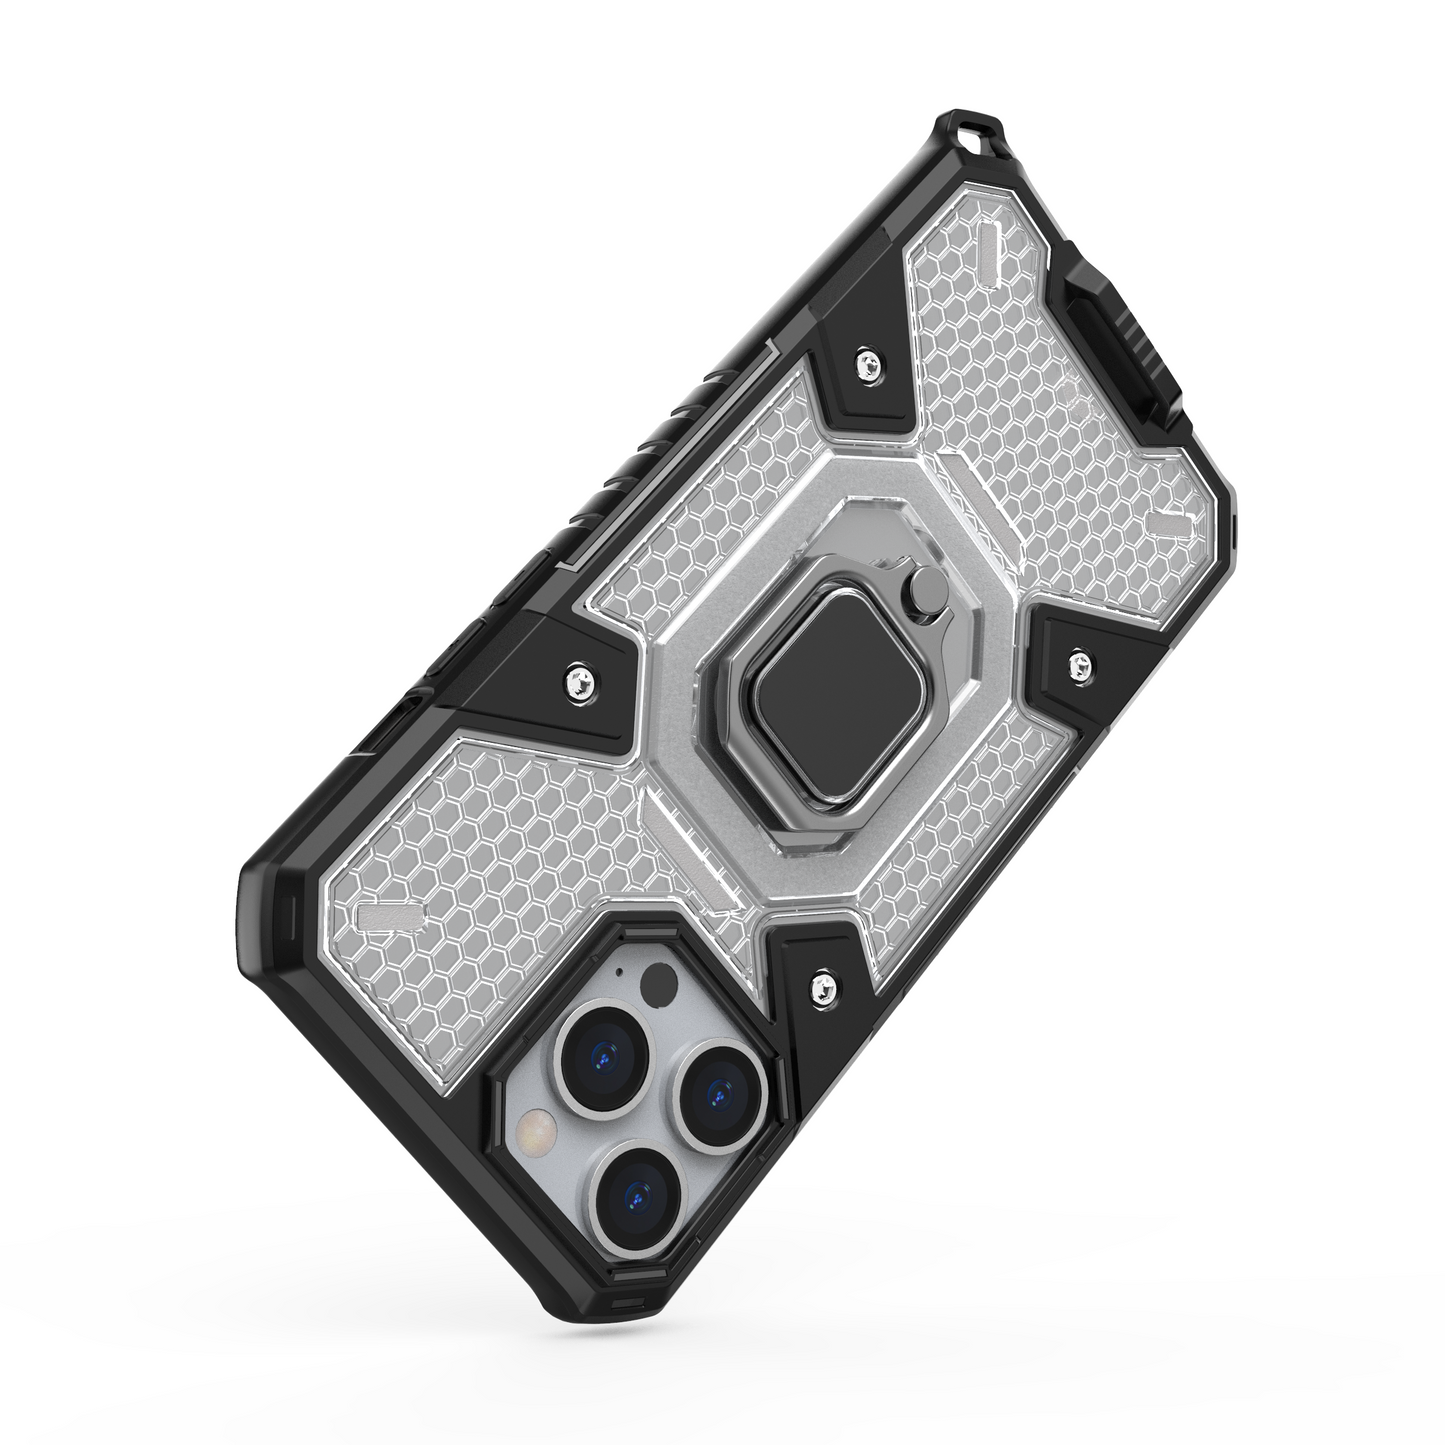 Space Capsule Case For Iphone